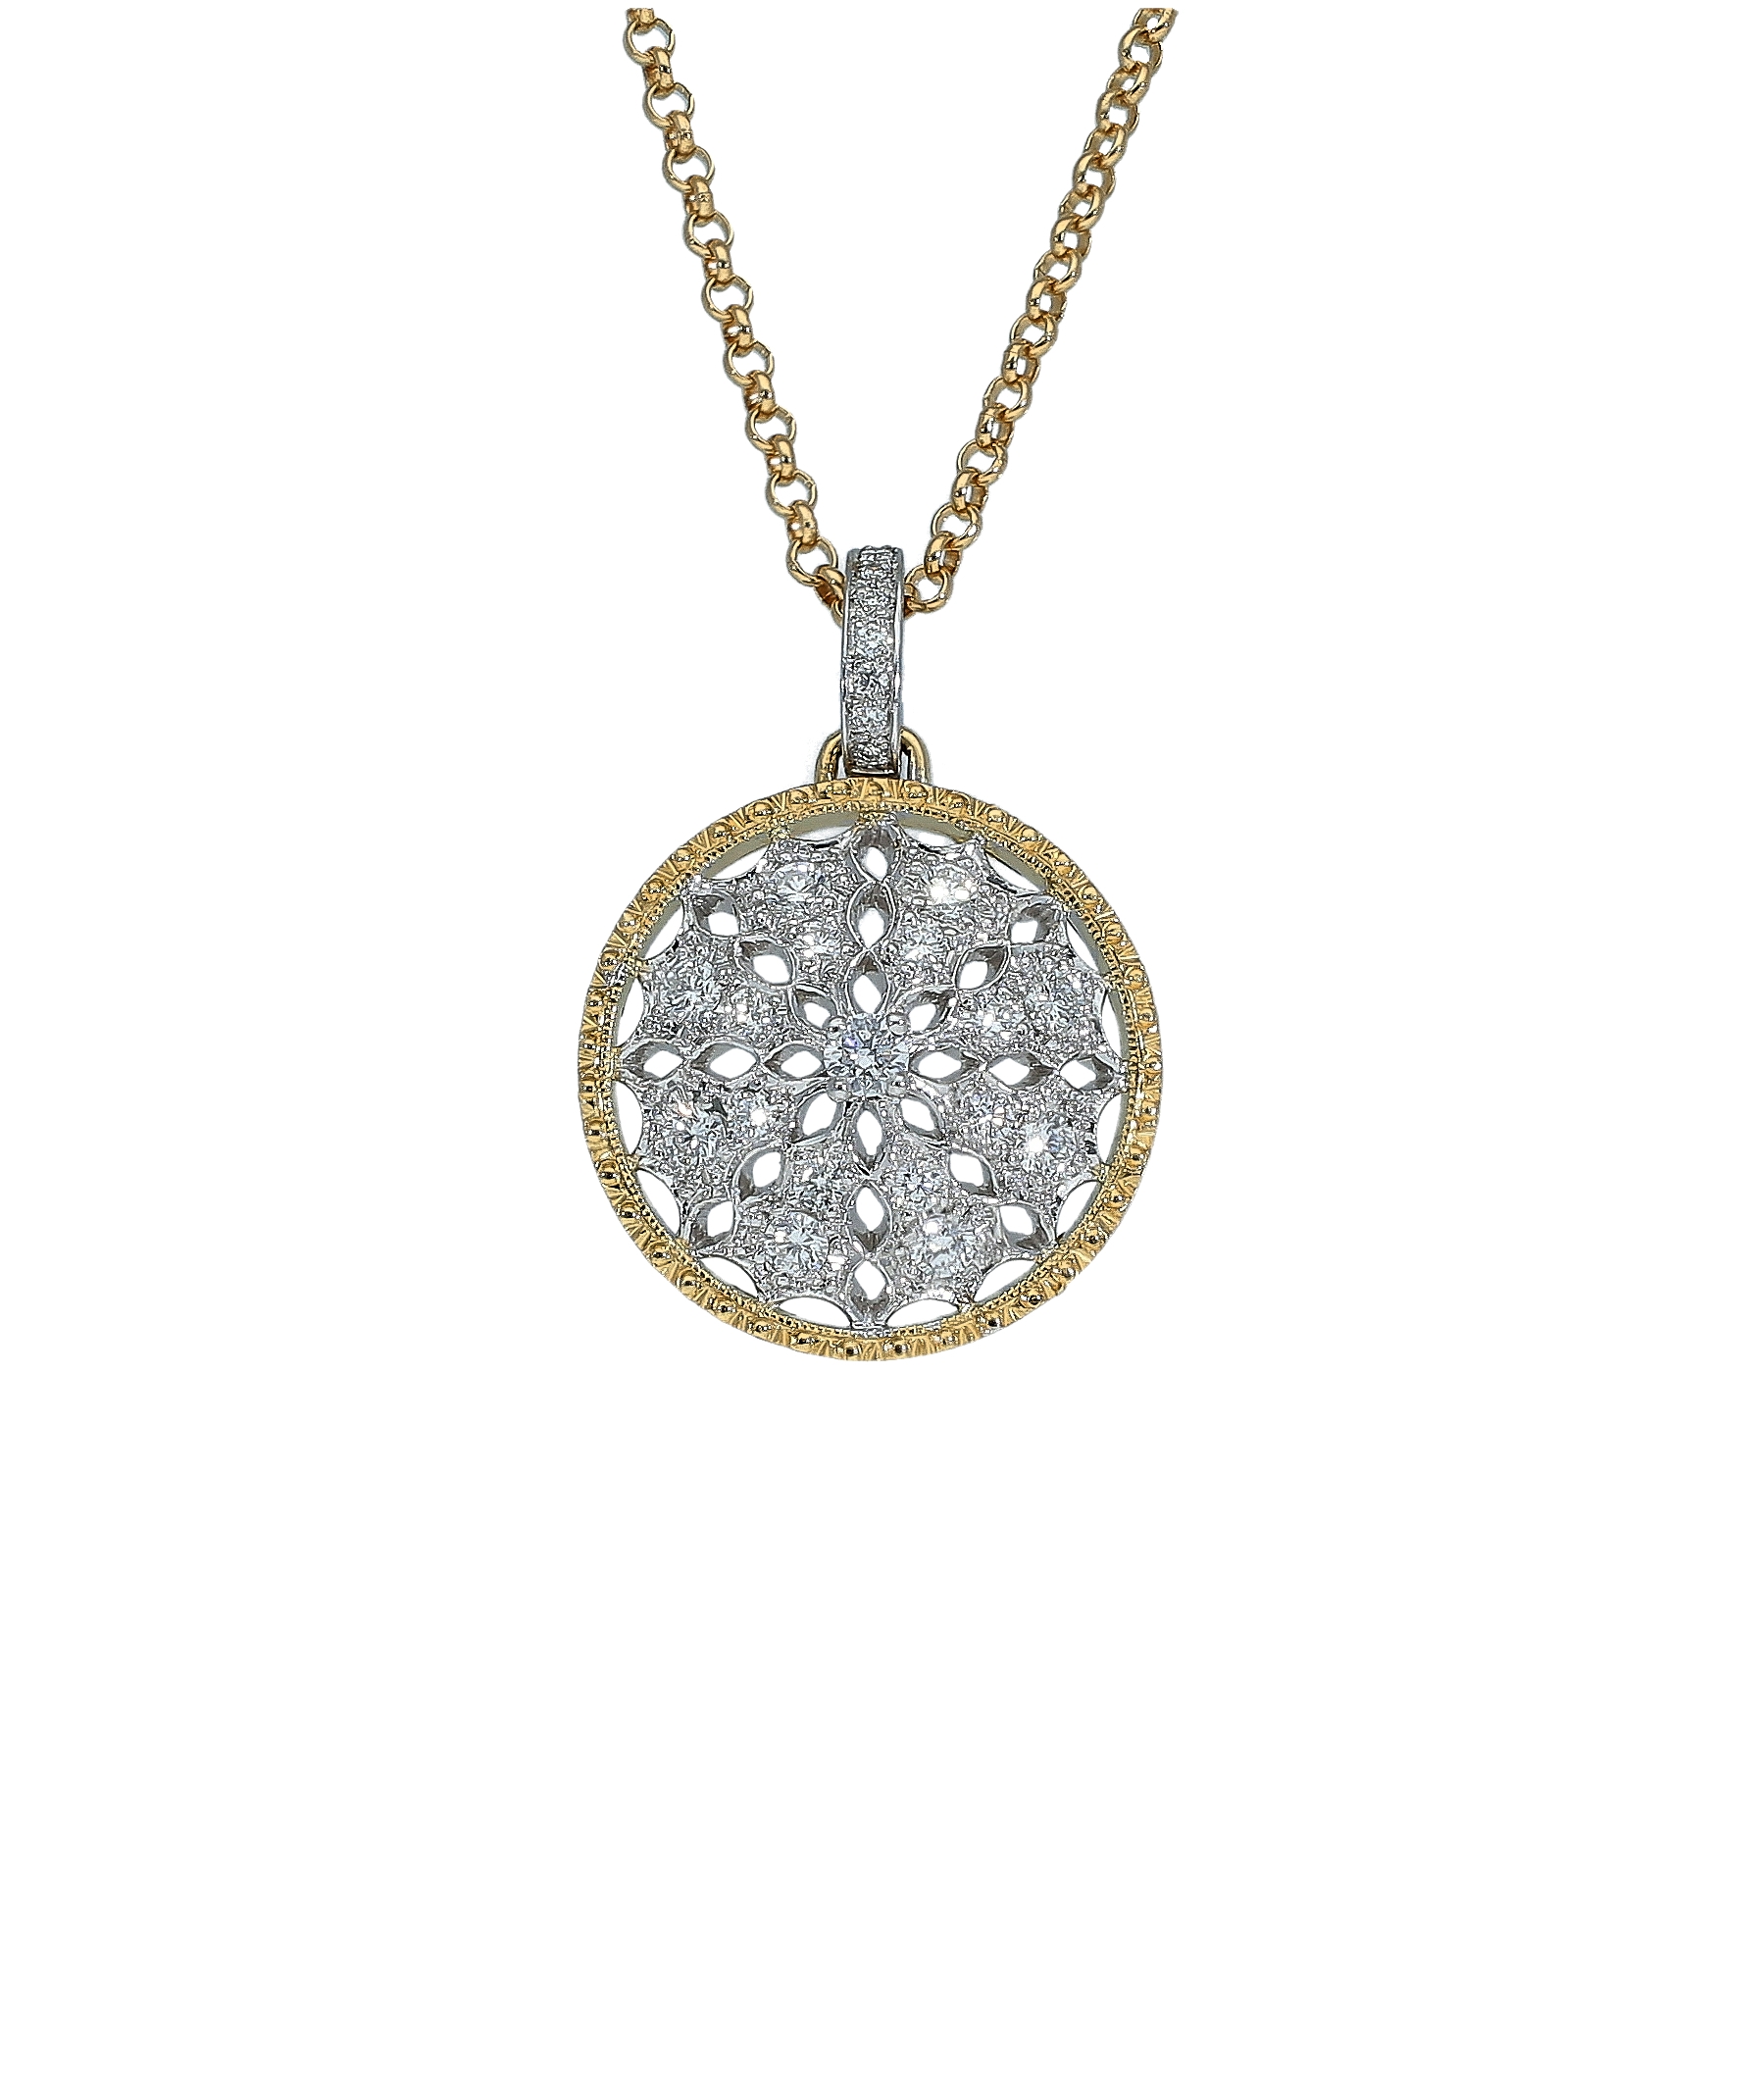 FLORENTINE PENDANT NECKLACE IN 18KT YELLOW AND WHITE GOLD WITH DIAMONDS